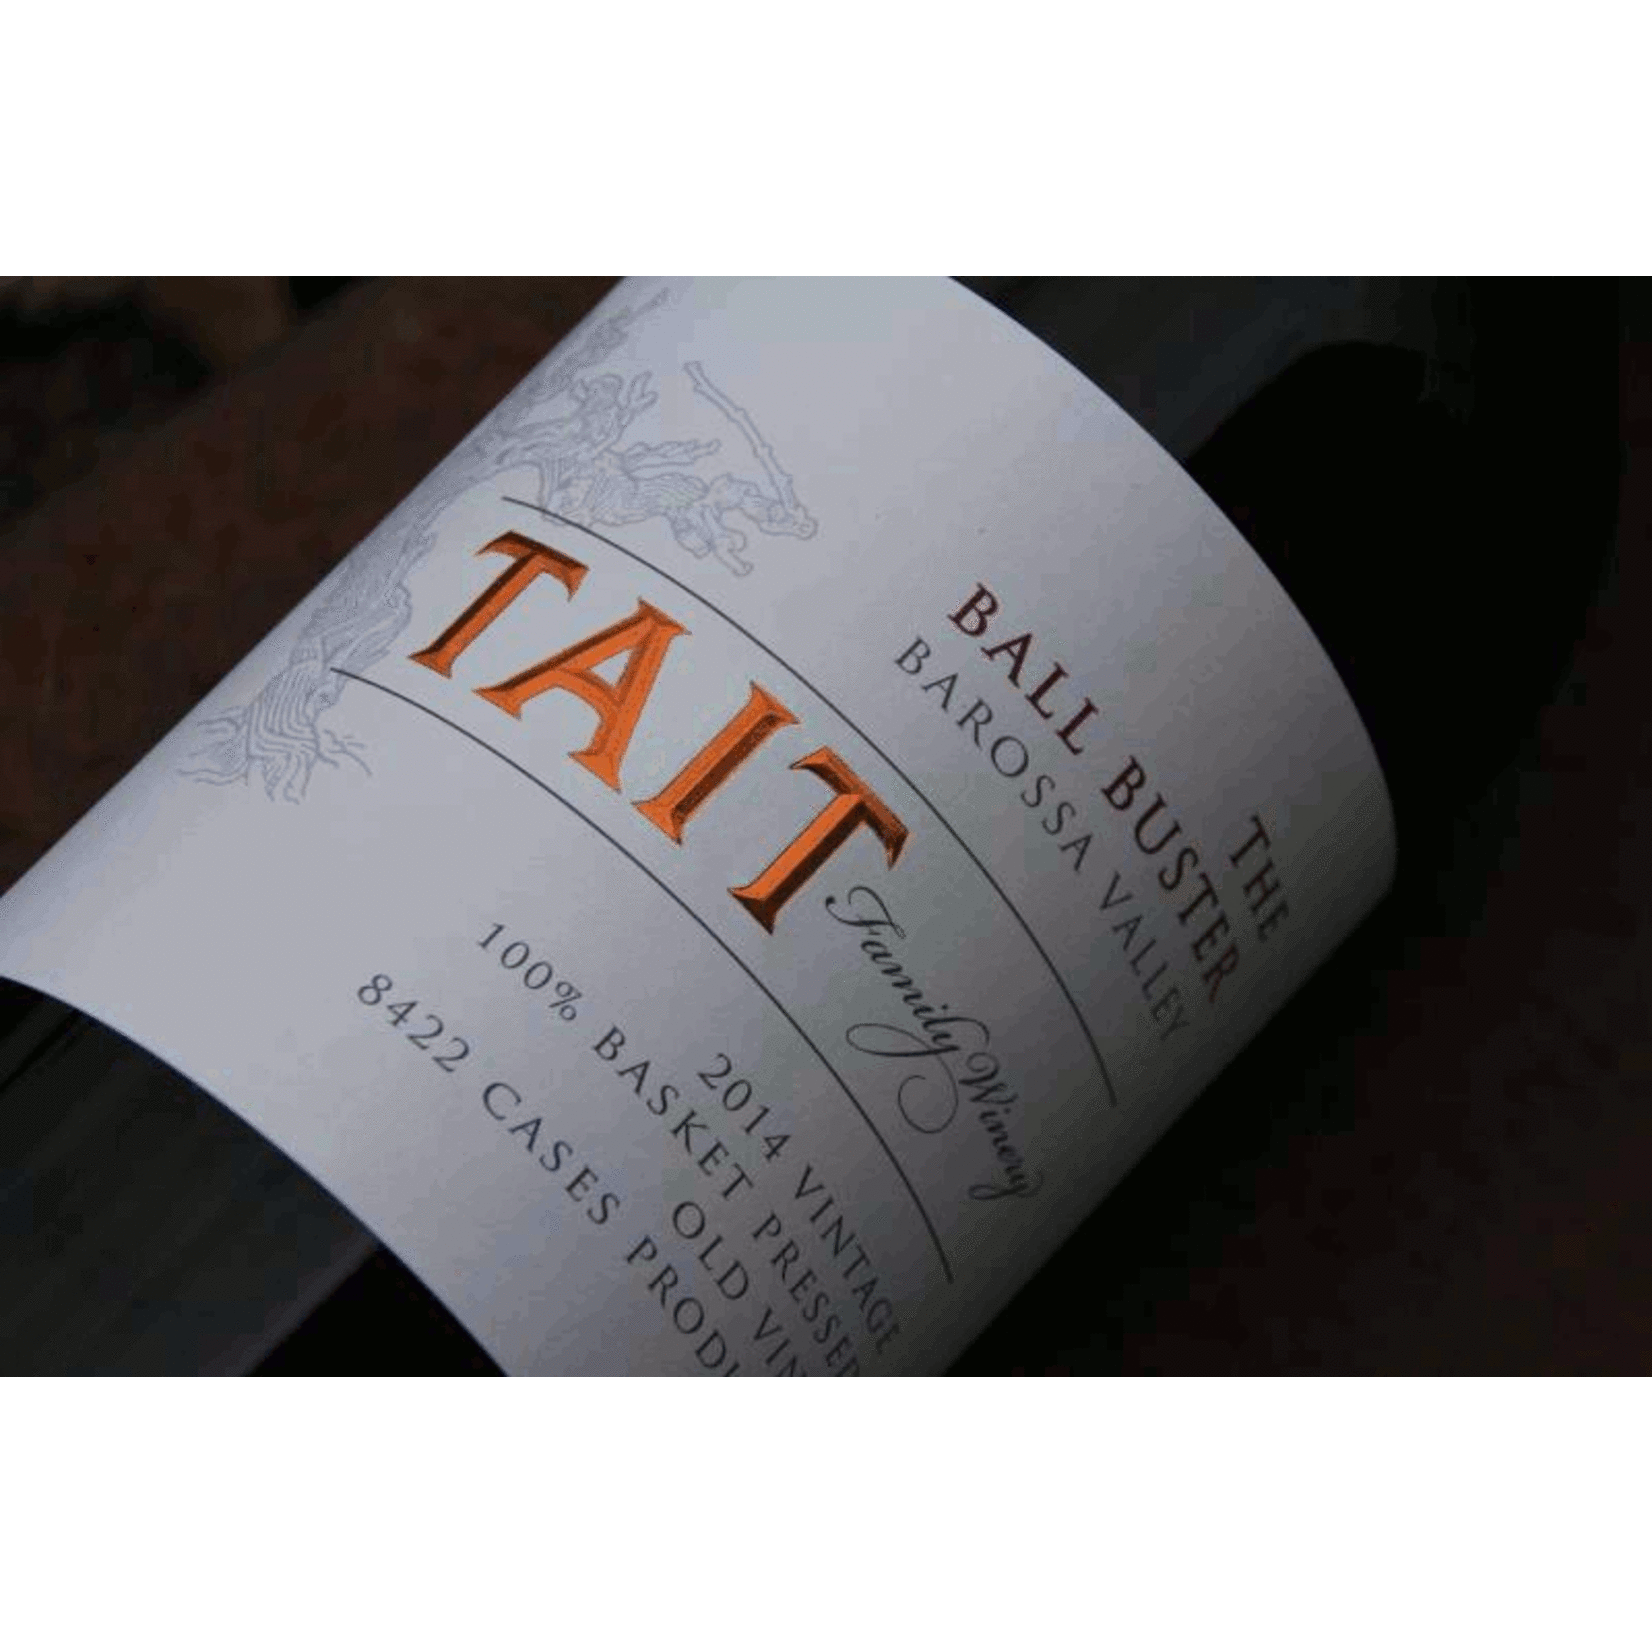 Tait Family Winery Tait Family Winery "The Ballbuster" Red Blend 2020  Barossa Valley Australia